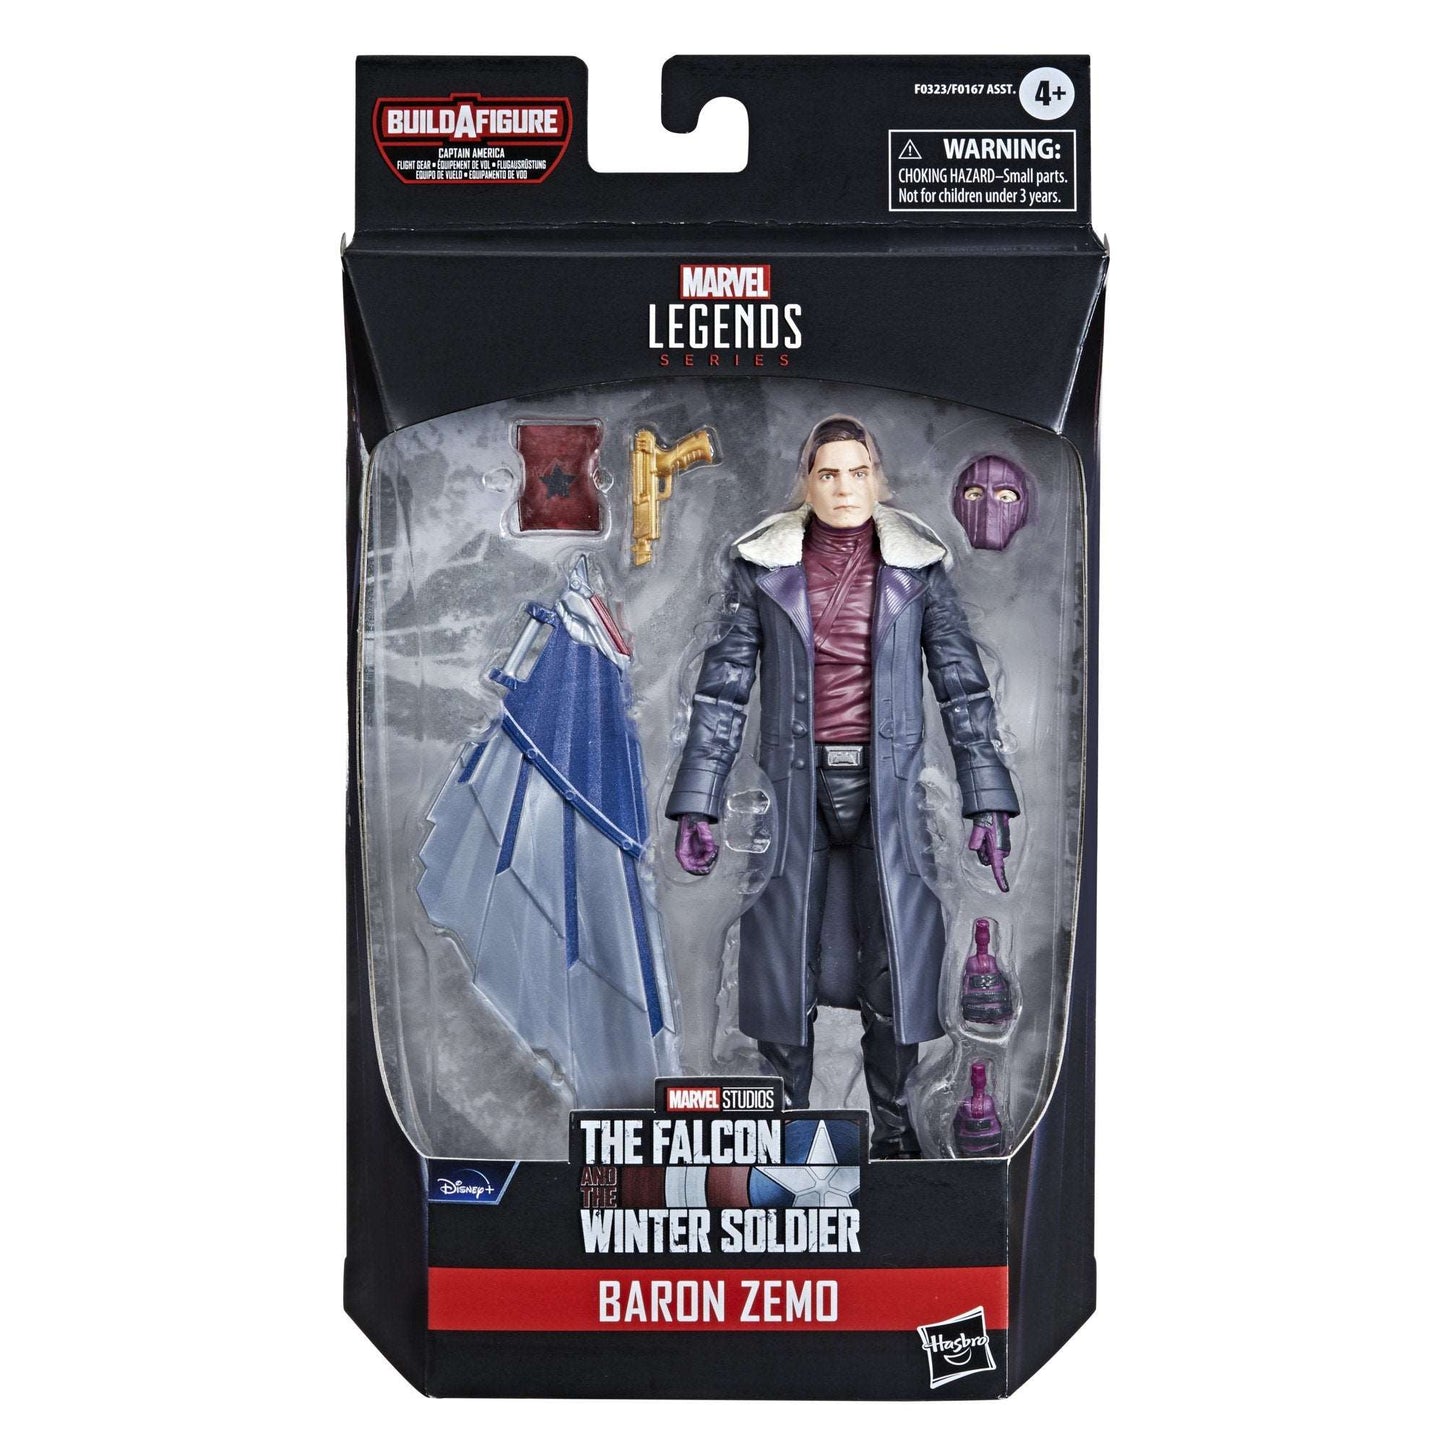 Hasbro Marvel Legends Series Disney+ Avengers Falcon and the Winter Soldier Baron Zemo in box package